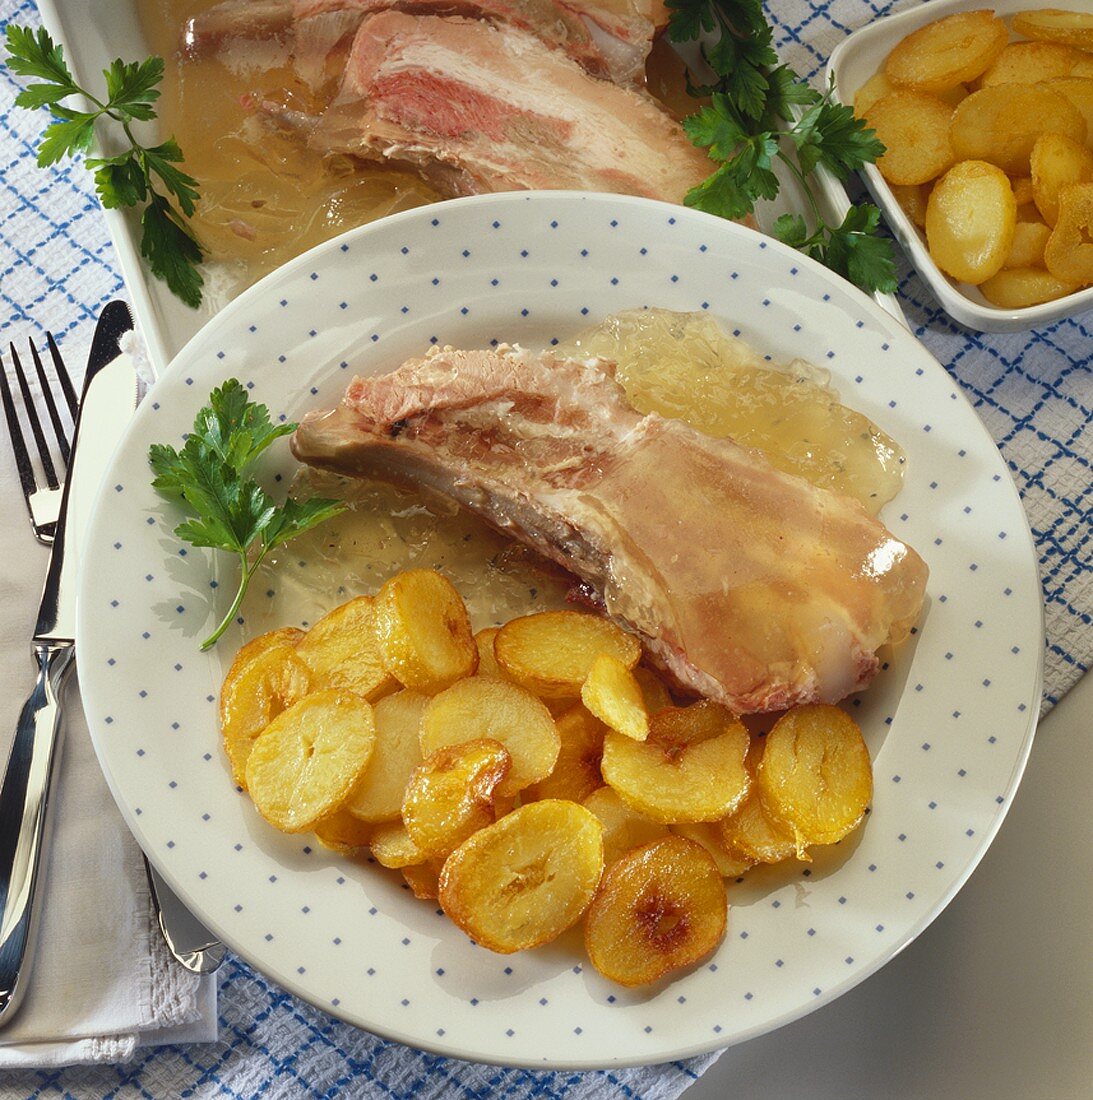 Saure Rippchen (pork ribs in jelly) with fried potatoes